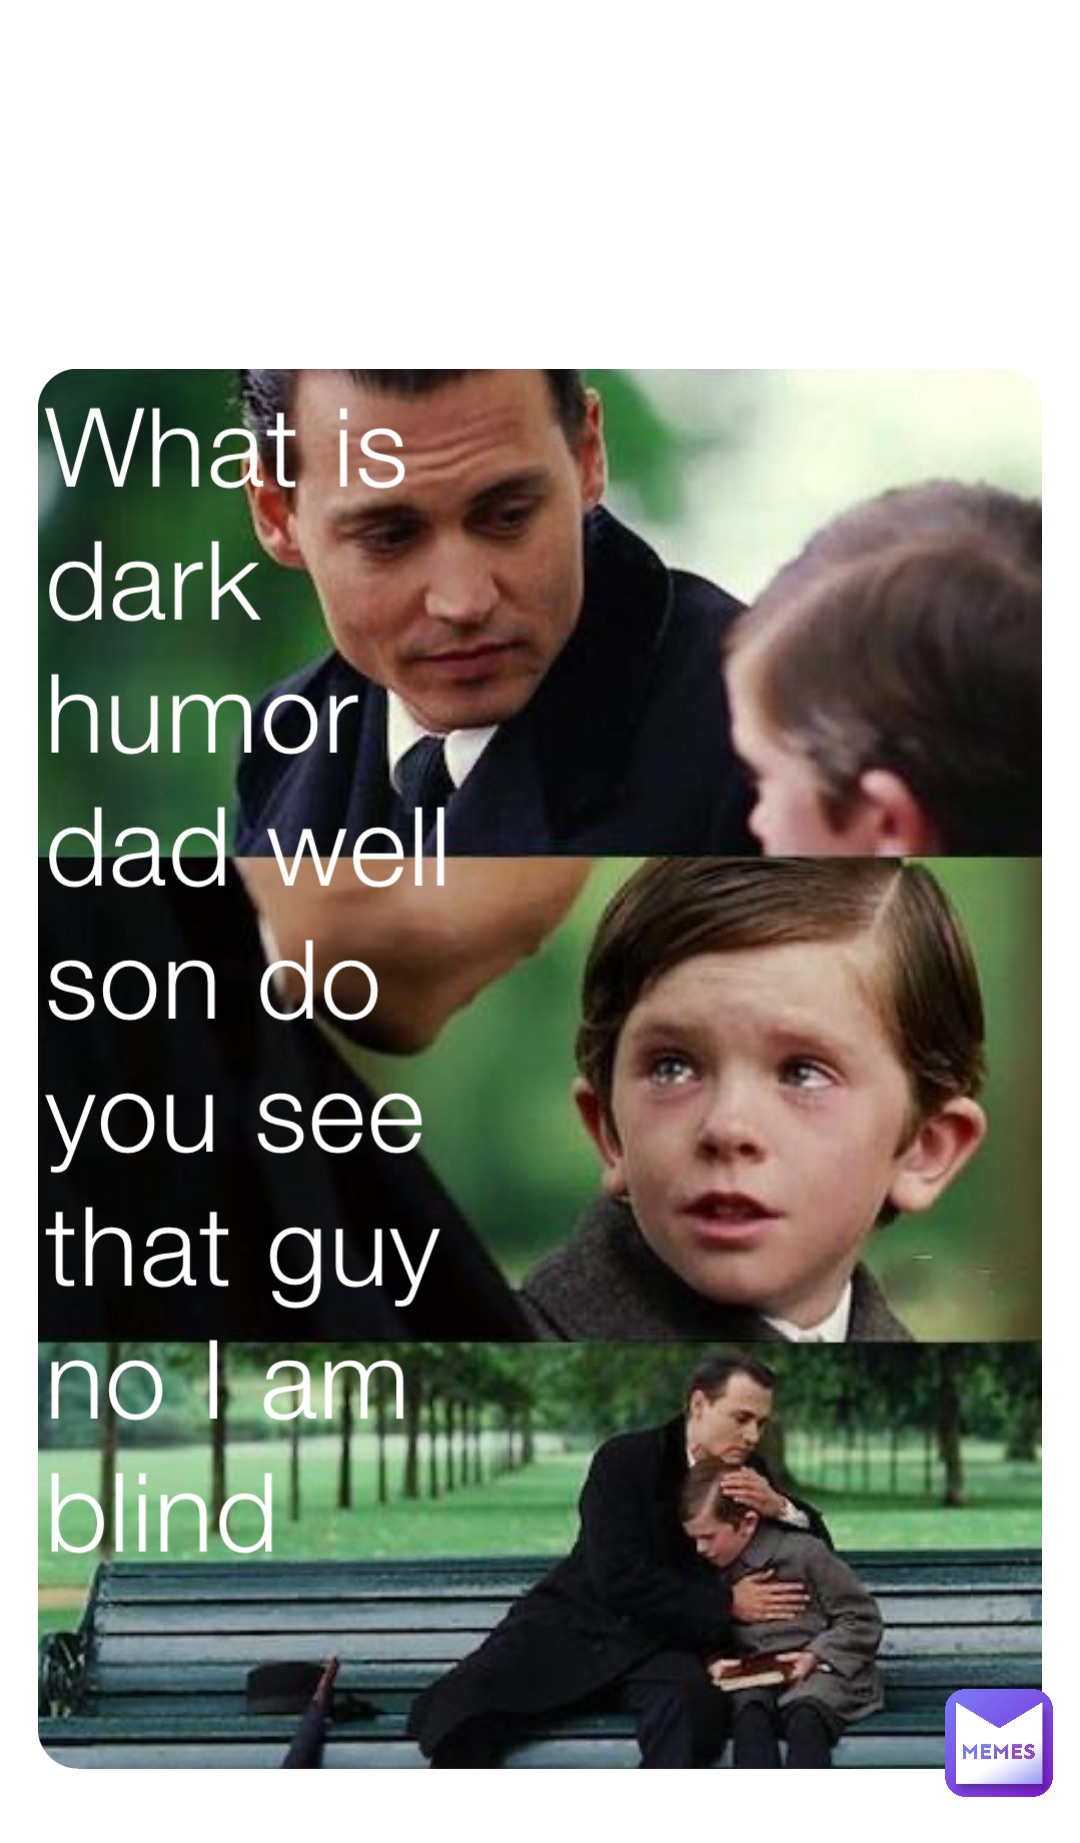 What is dark humor dad well son do you see that guy no I am blind